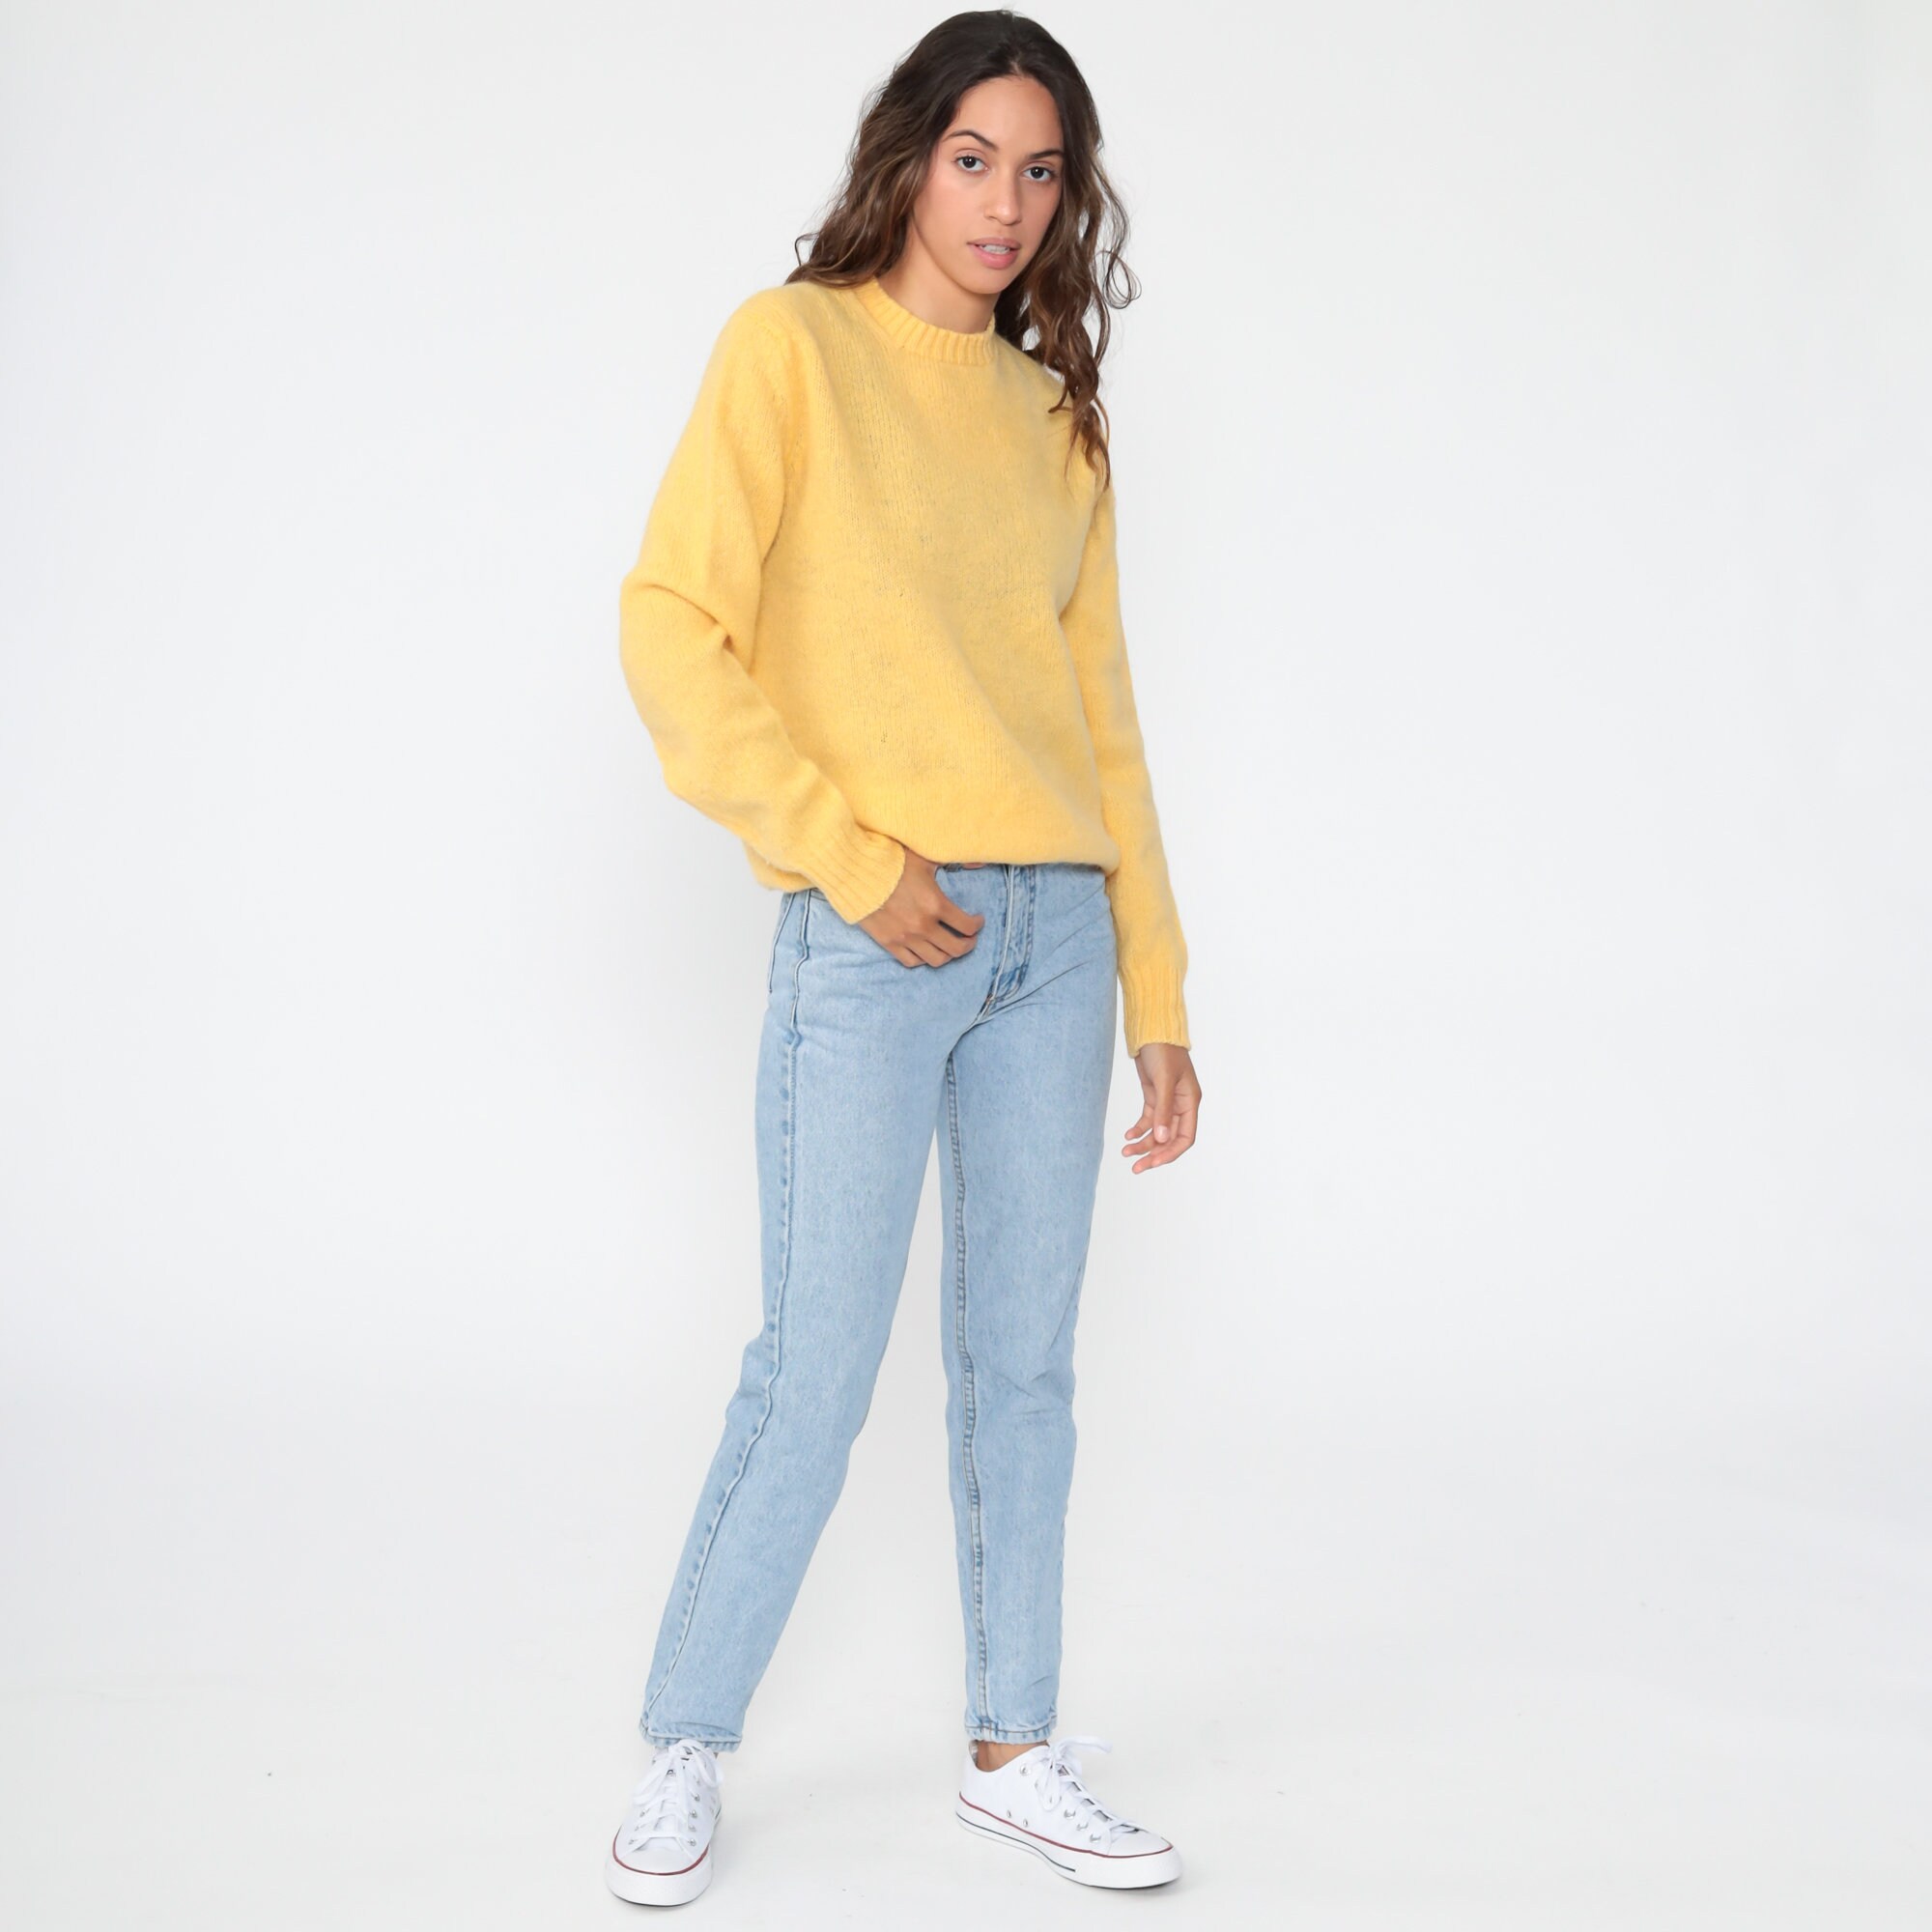 Yellow Wool Sweater 80s Slouchy Pullover Jumper Sweater Crewneck ...